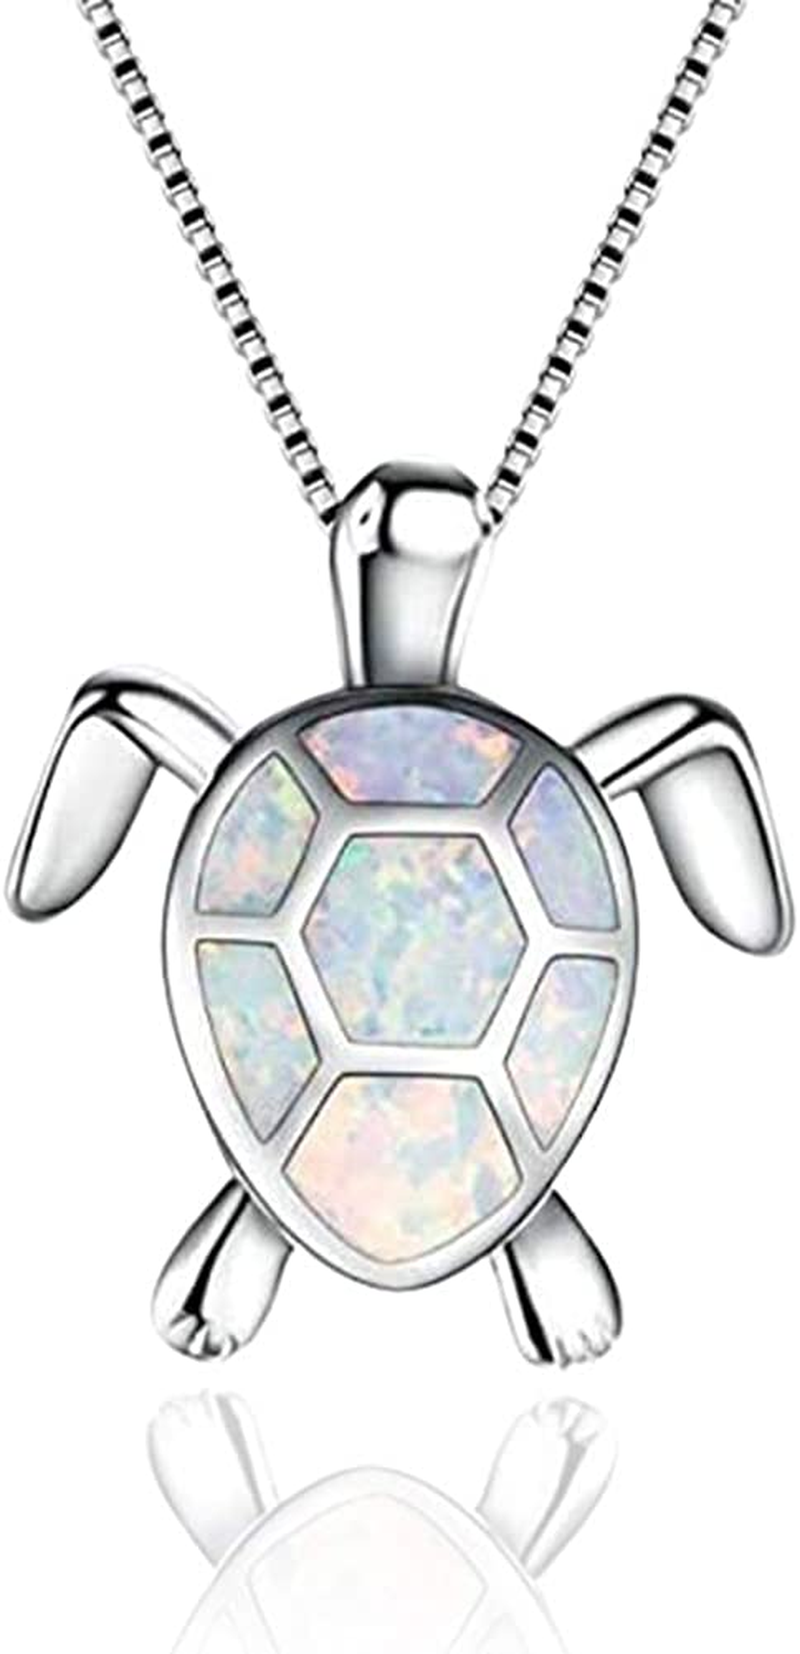 MICHIKO Cute Turtle Pendant Necklace Lovely Animals White Fire Opal 925 Sterling Silver Necklace Jewellery Gifts (White)